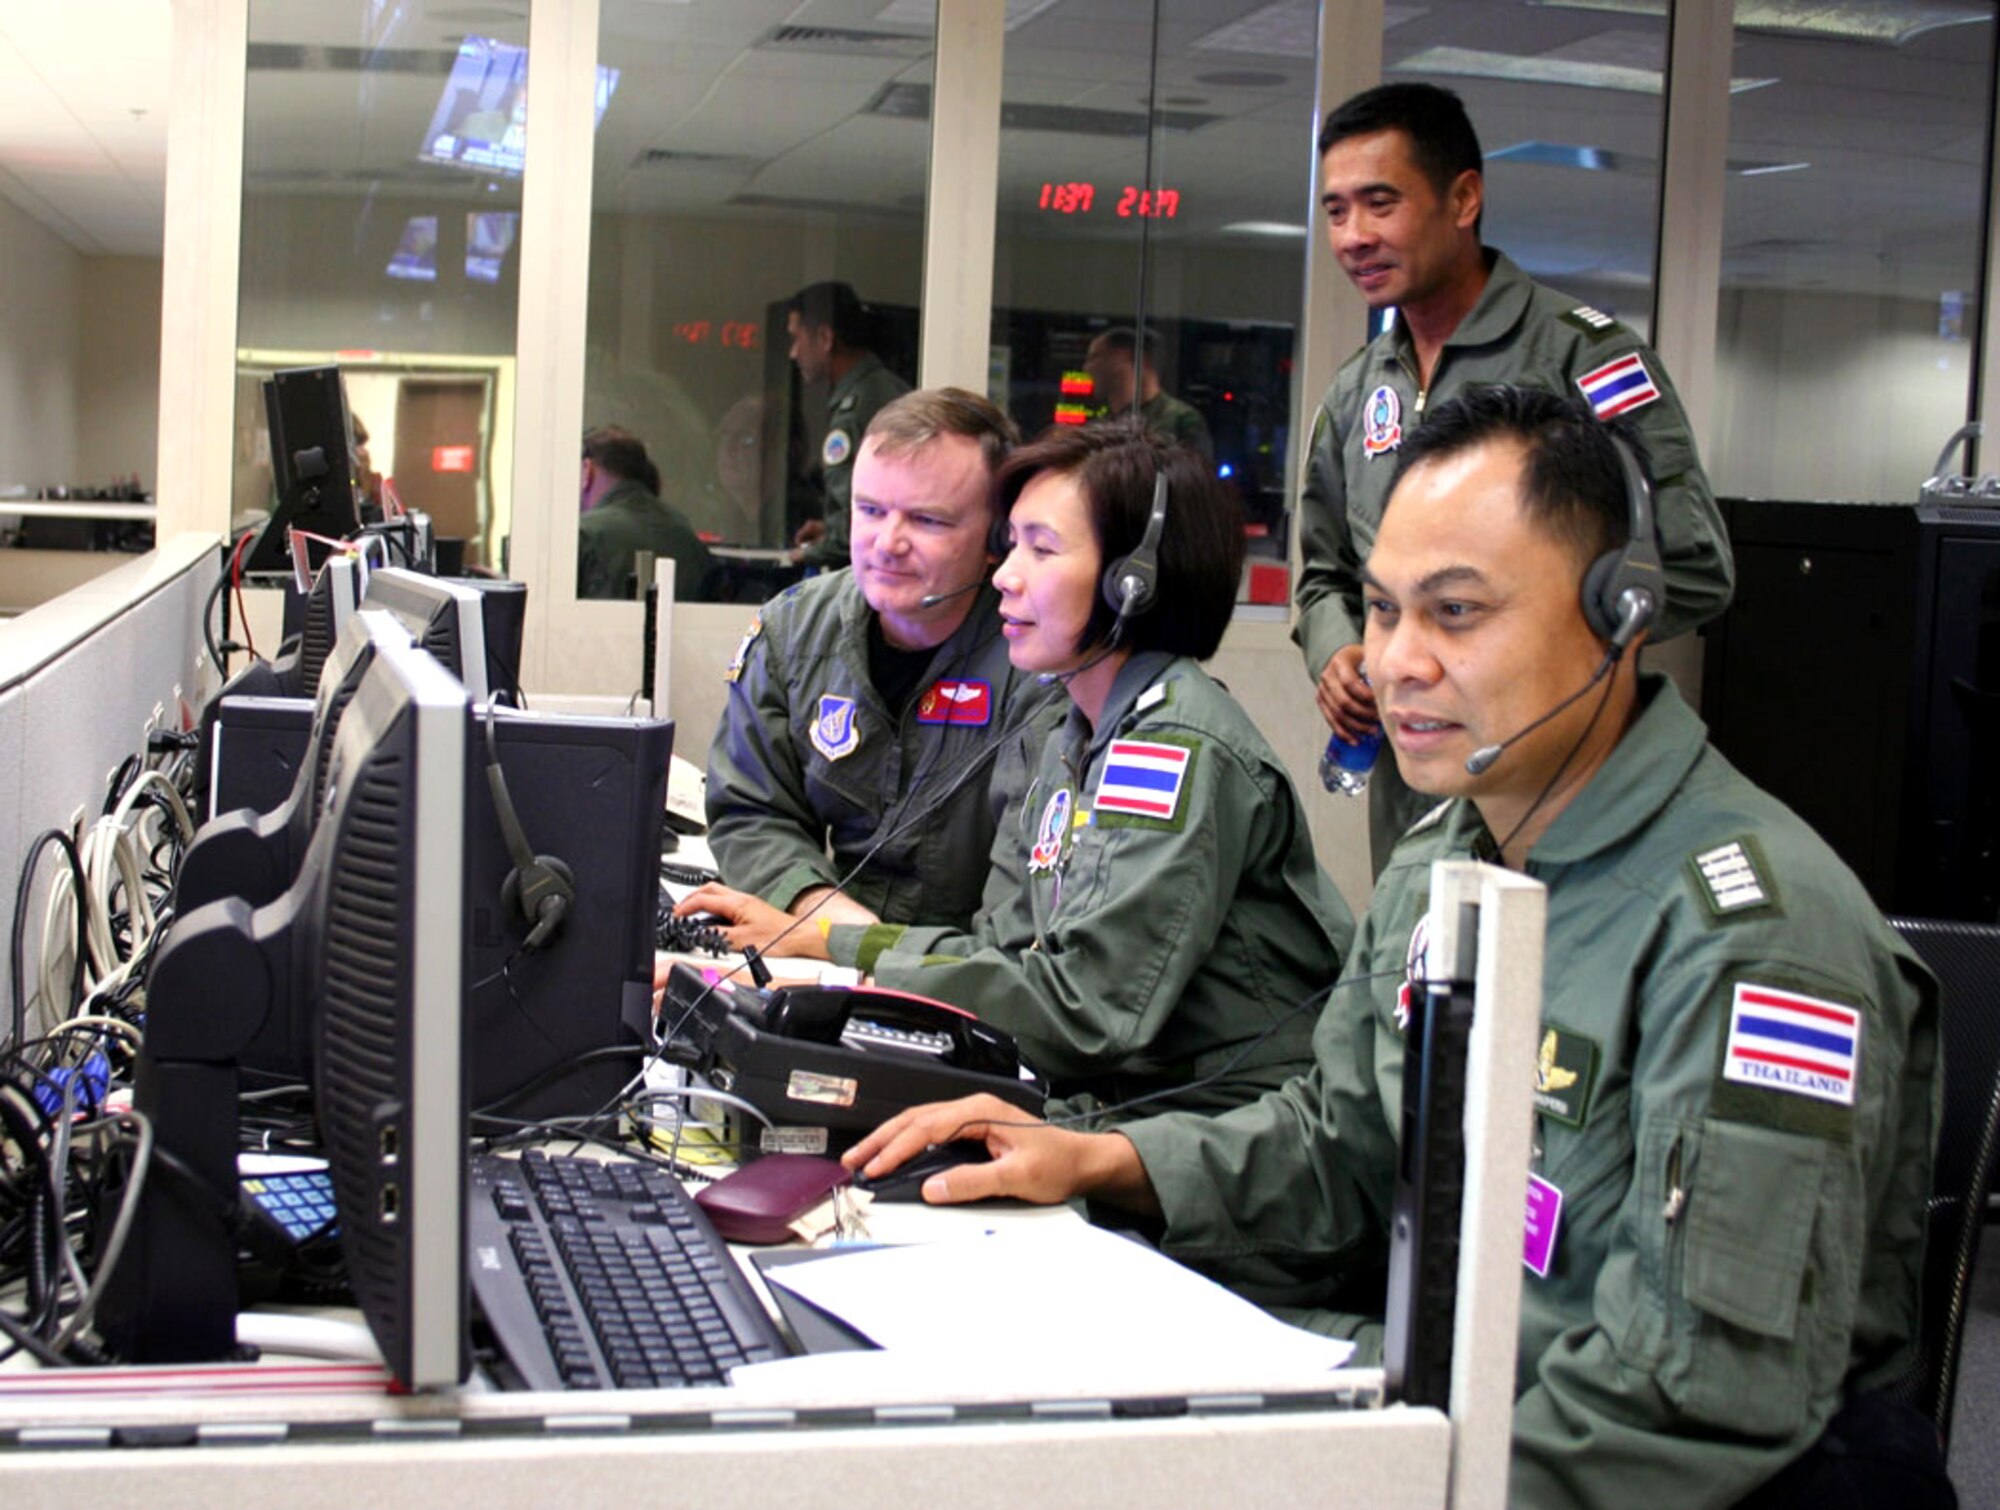 Lt. Col. Curt Walker (left), Wing Commander Sumana Chulamokha, Group Capt. Suwit Wattanaroek (standing) and Group Capt. Noi Parkperm coordinate air operations at the Gen. George C. Kenney Headquarters during the 25th annual Cobra Gold exercise on Tuesday, May 23, 2006. The exercise is hosted by Thailand at Hickam Air Force Base, Hawaii, from May 15 to 26. It demonstrates the planning, execution and reach-back capabilities the headquarters can provide in a contingency. Colonel Walker is with the combat operations division at Kenney Headquarters and the three Thai officers are with the Royal Thai Air Force. (U.S. Air Force photo/Capt. Yvonne Levardi)